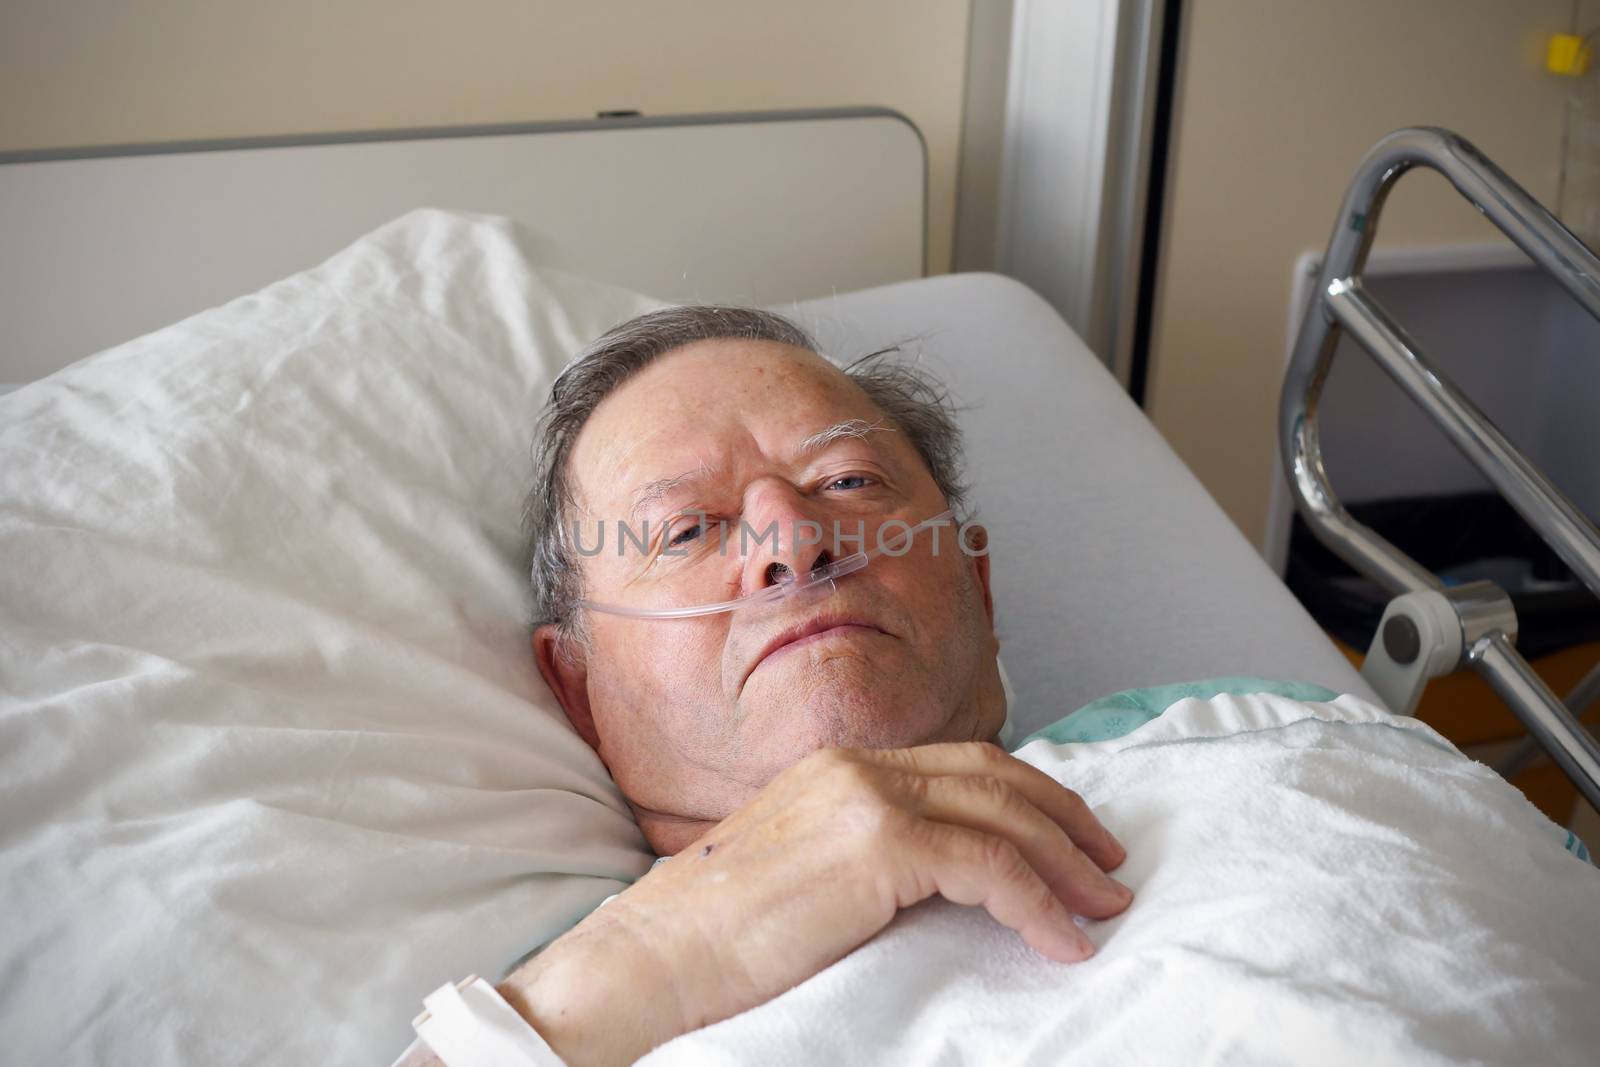 Man in hospital bed by Mirage3